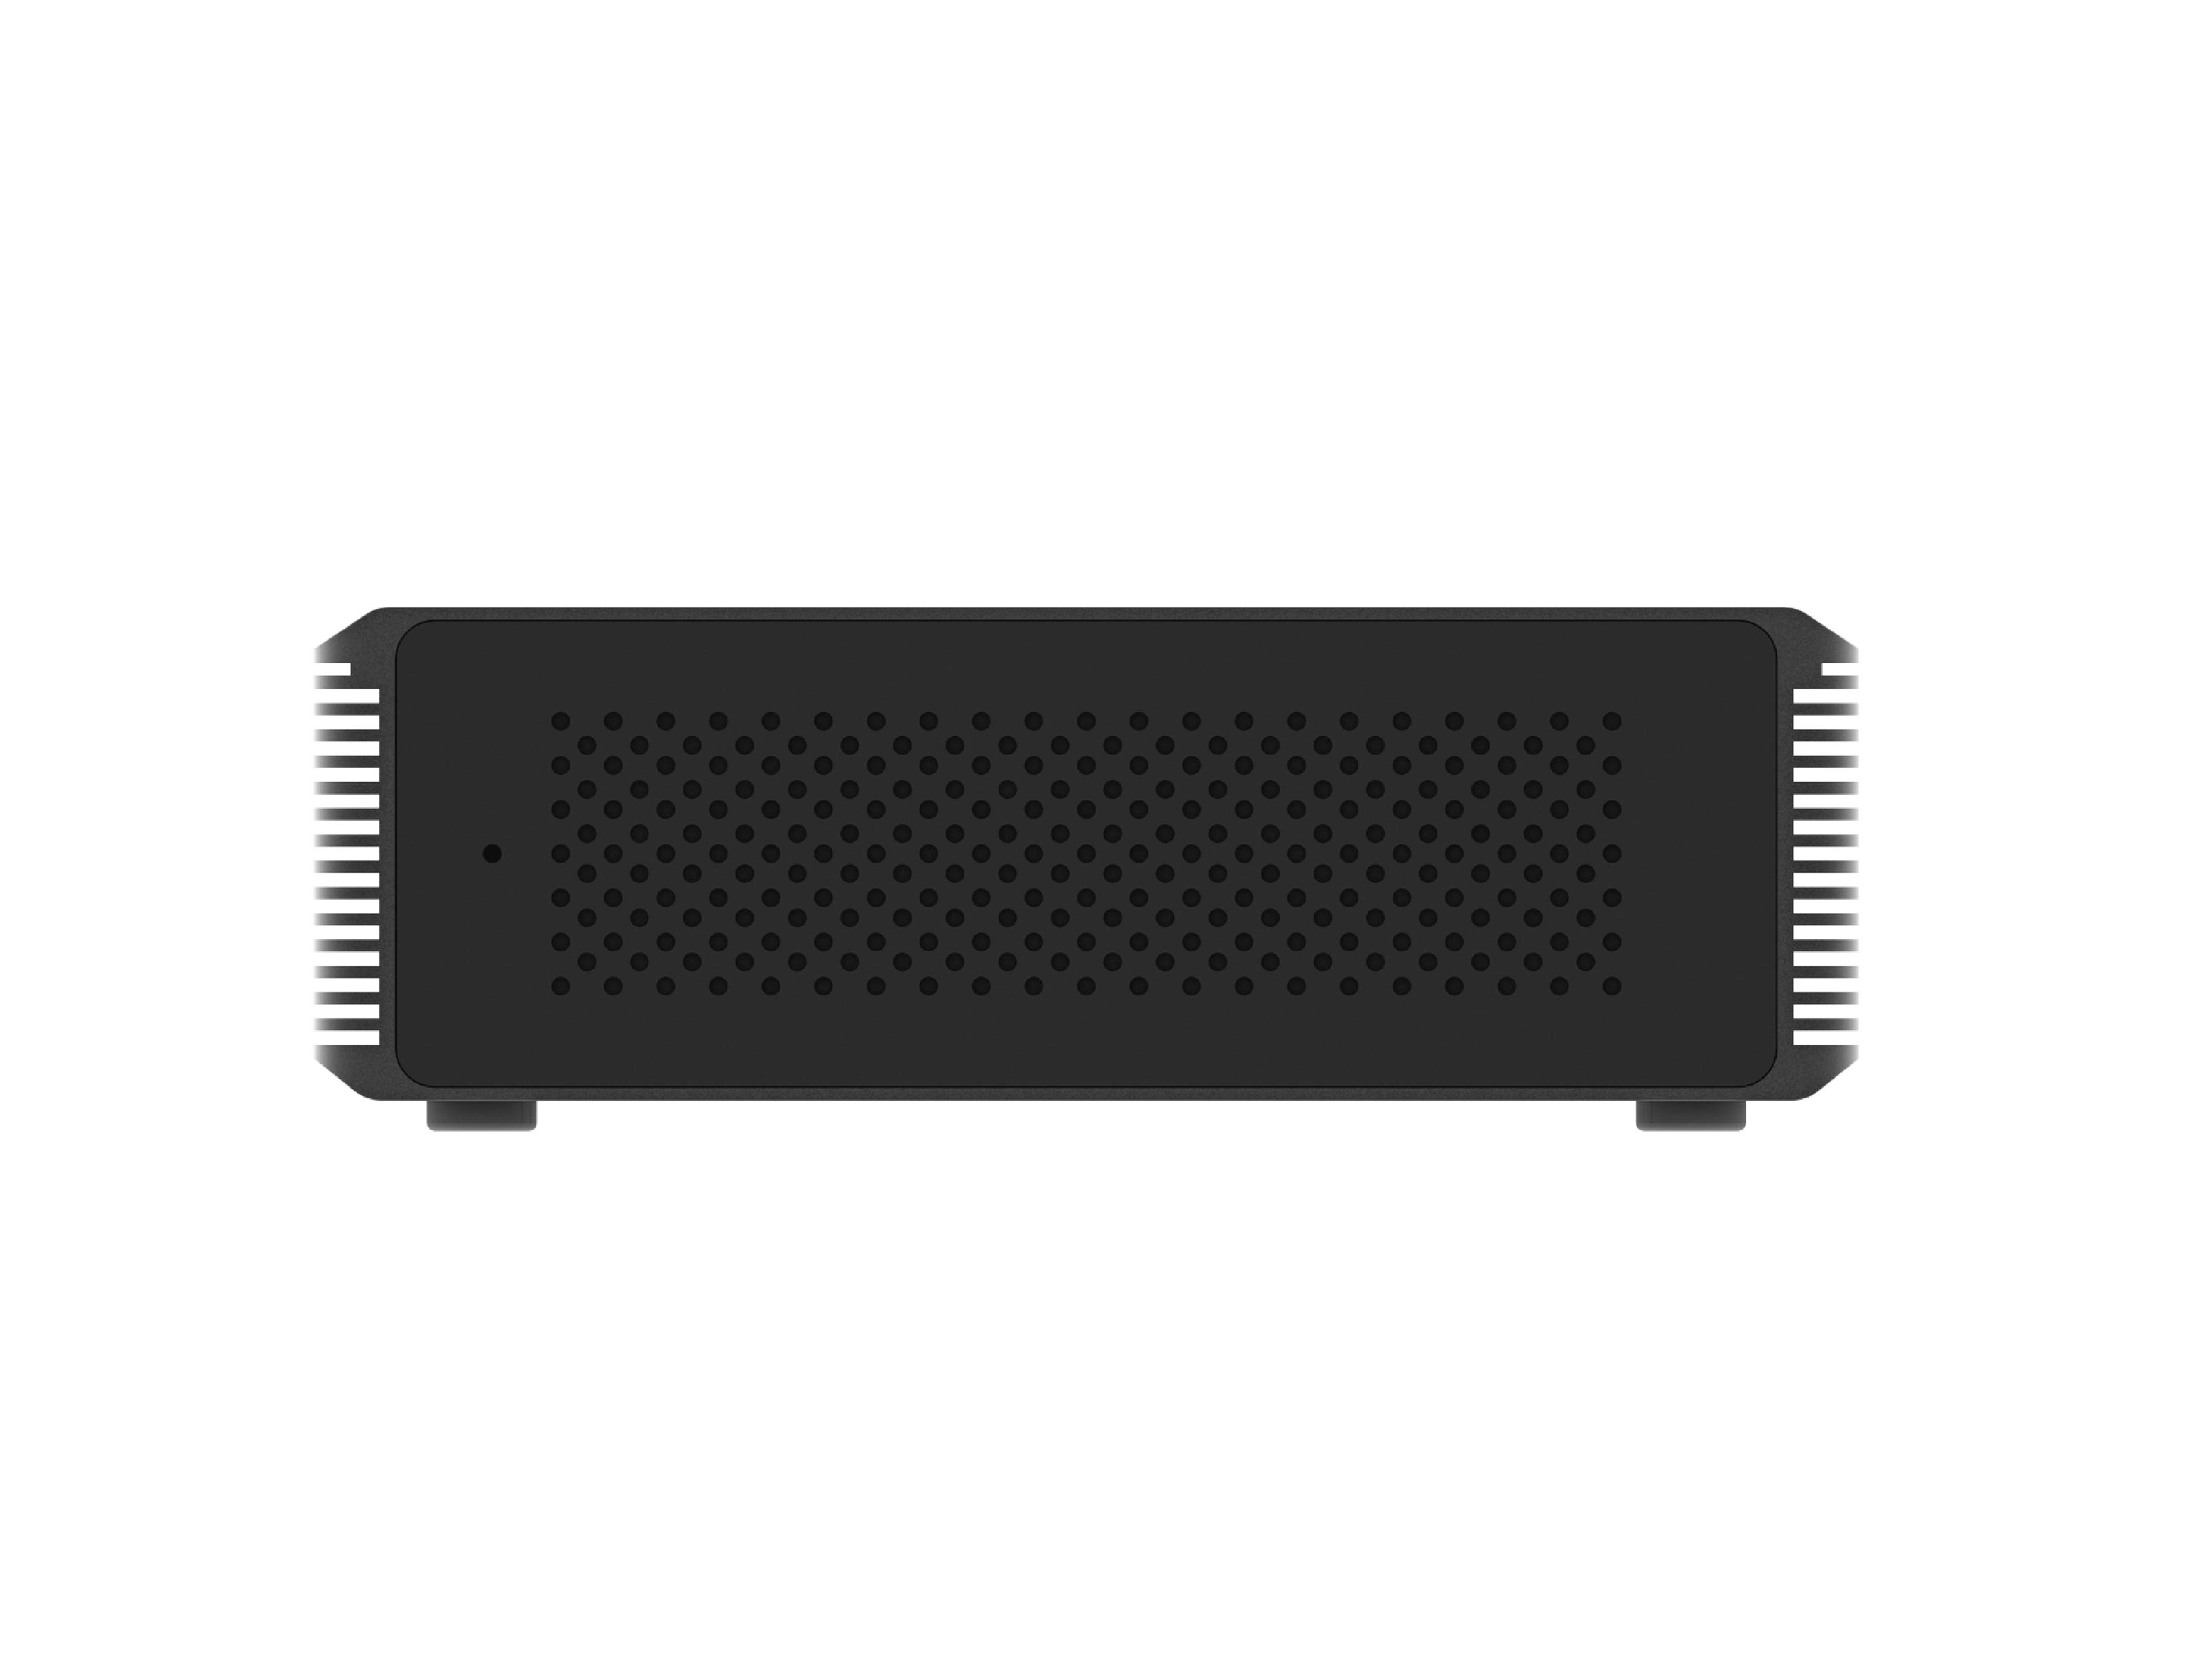 TBT3 2 Bay M.2 NVMe SSD Enclosure (SI-9224TB3), compatible with 2x M.2 NVMe PCIe SSD, 2x Thunderbolt™ 3 40Gbps to host, 1x DisplayPort1.2 4K@60Hz output.